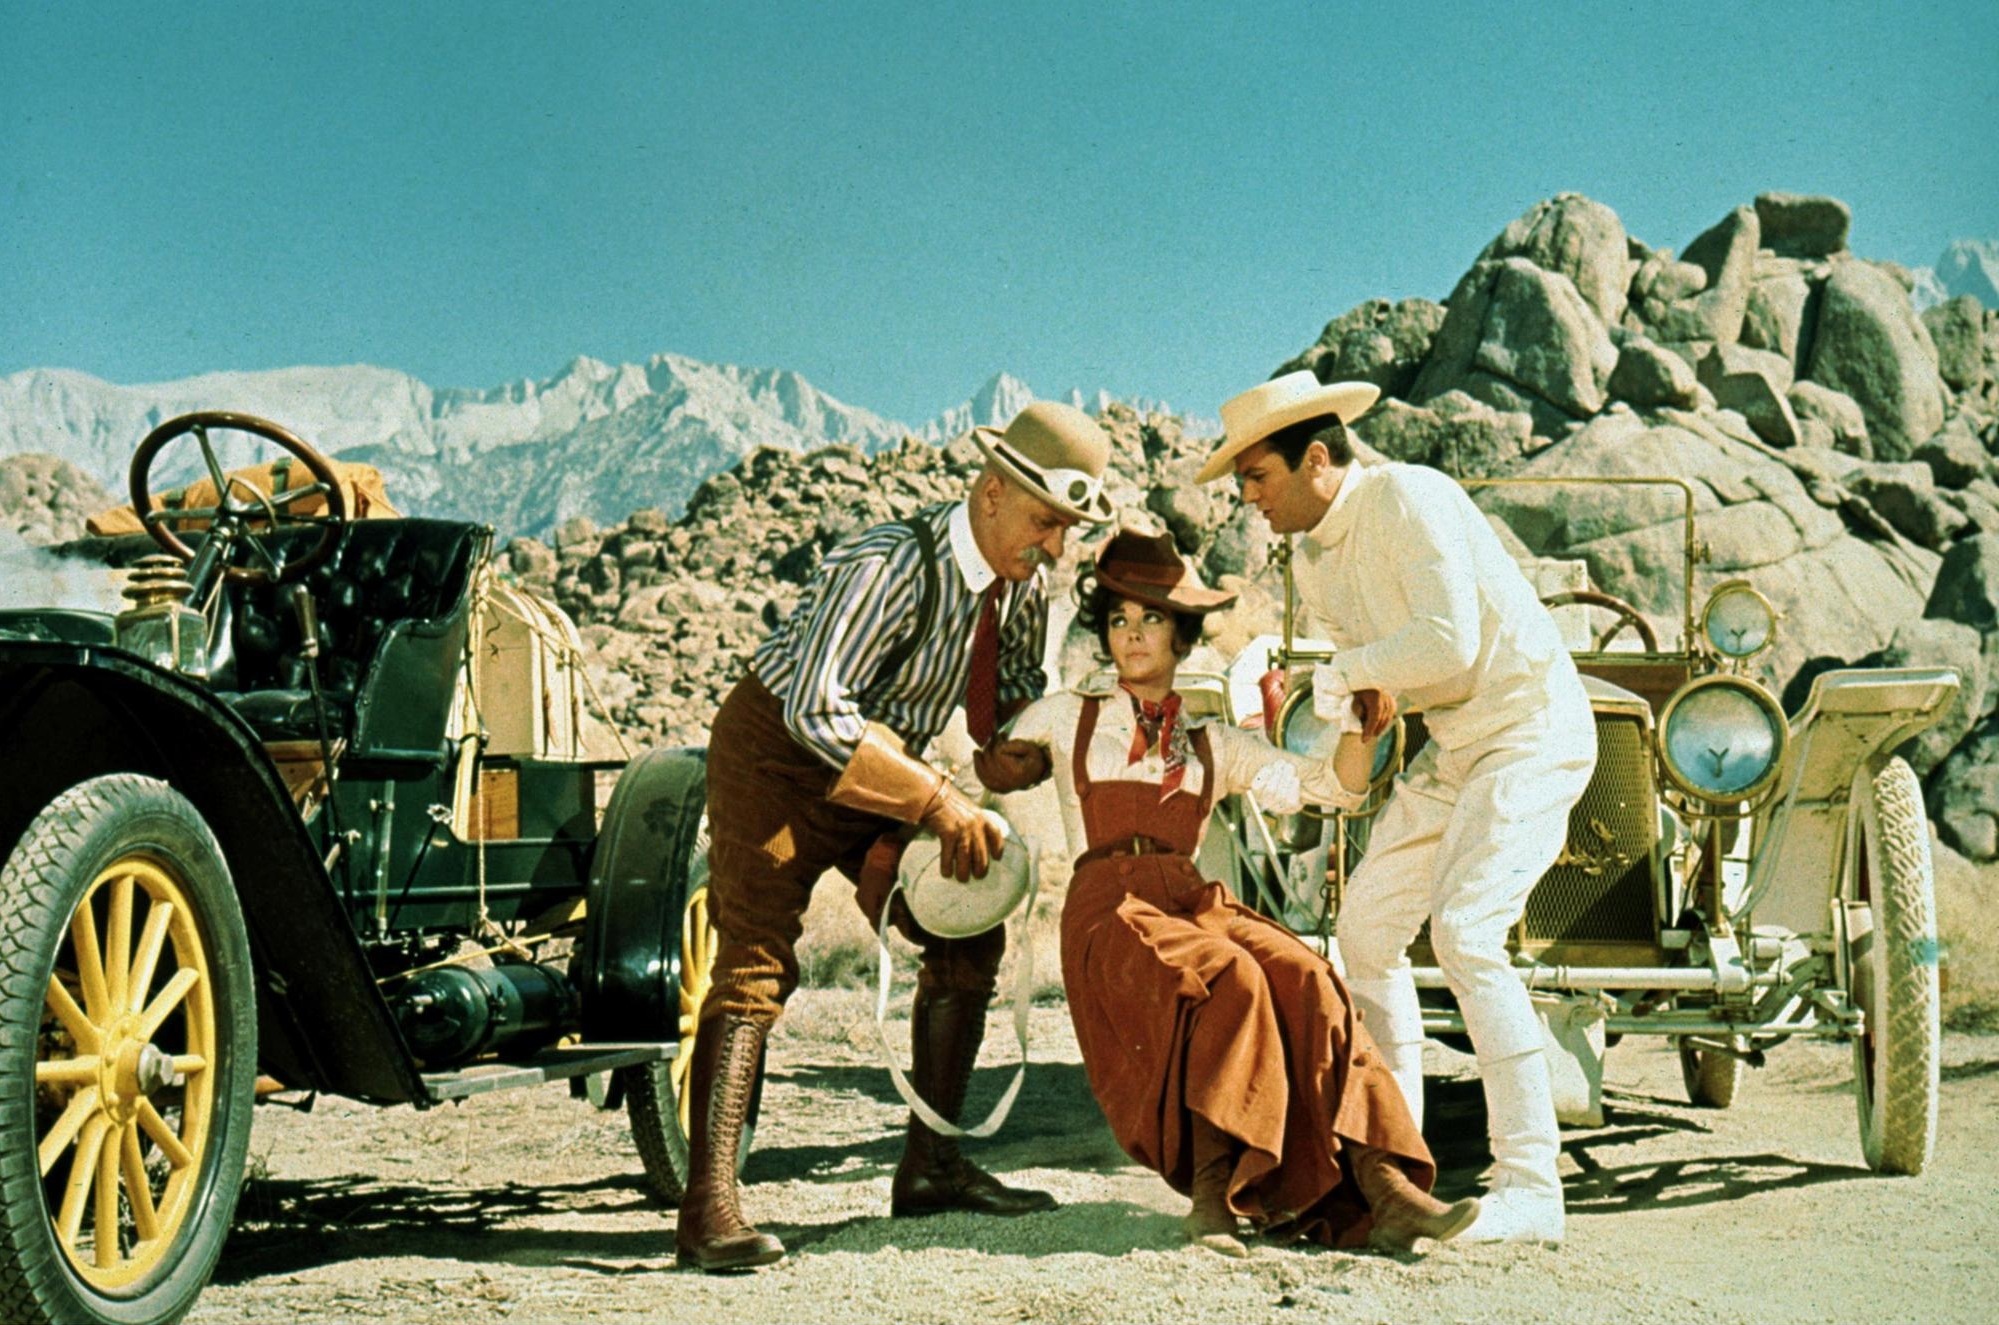 Still of Natalie Wood, Tony Curtis and Keenan Wynn in The Great Race (1965)